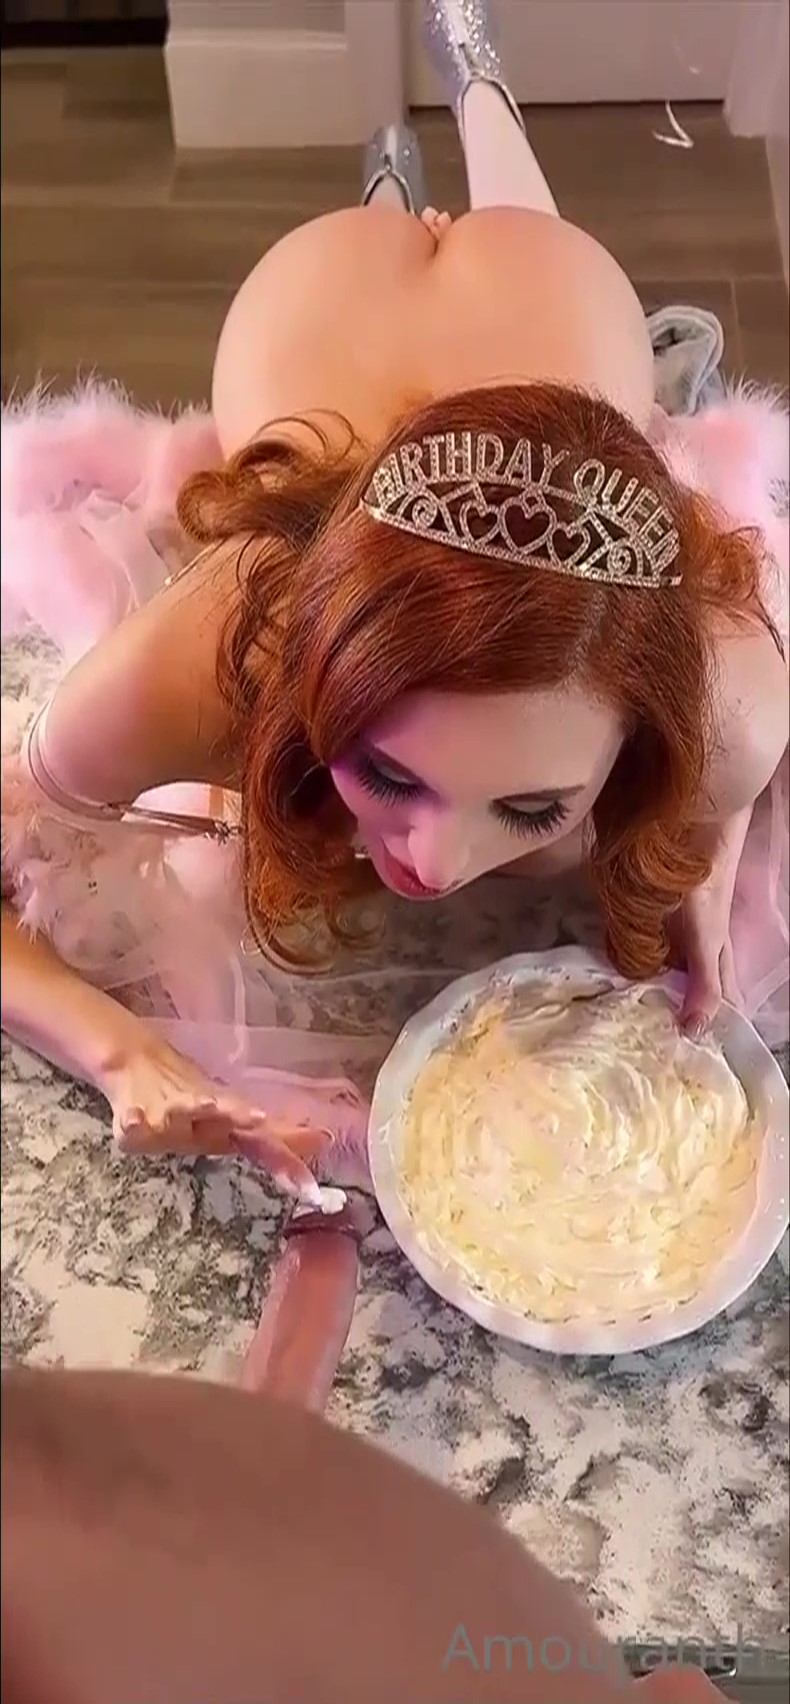 Amouranth Birthday Queen Suck'n Fuck w delivery guy